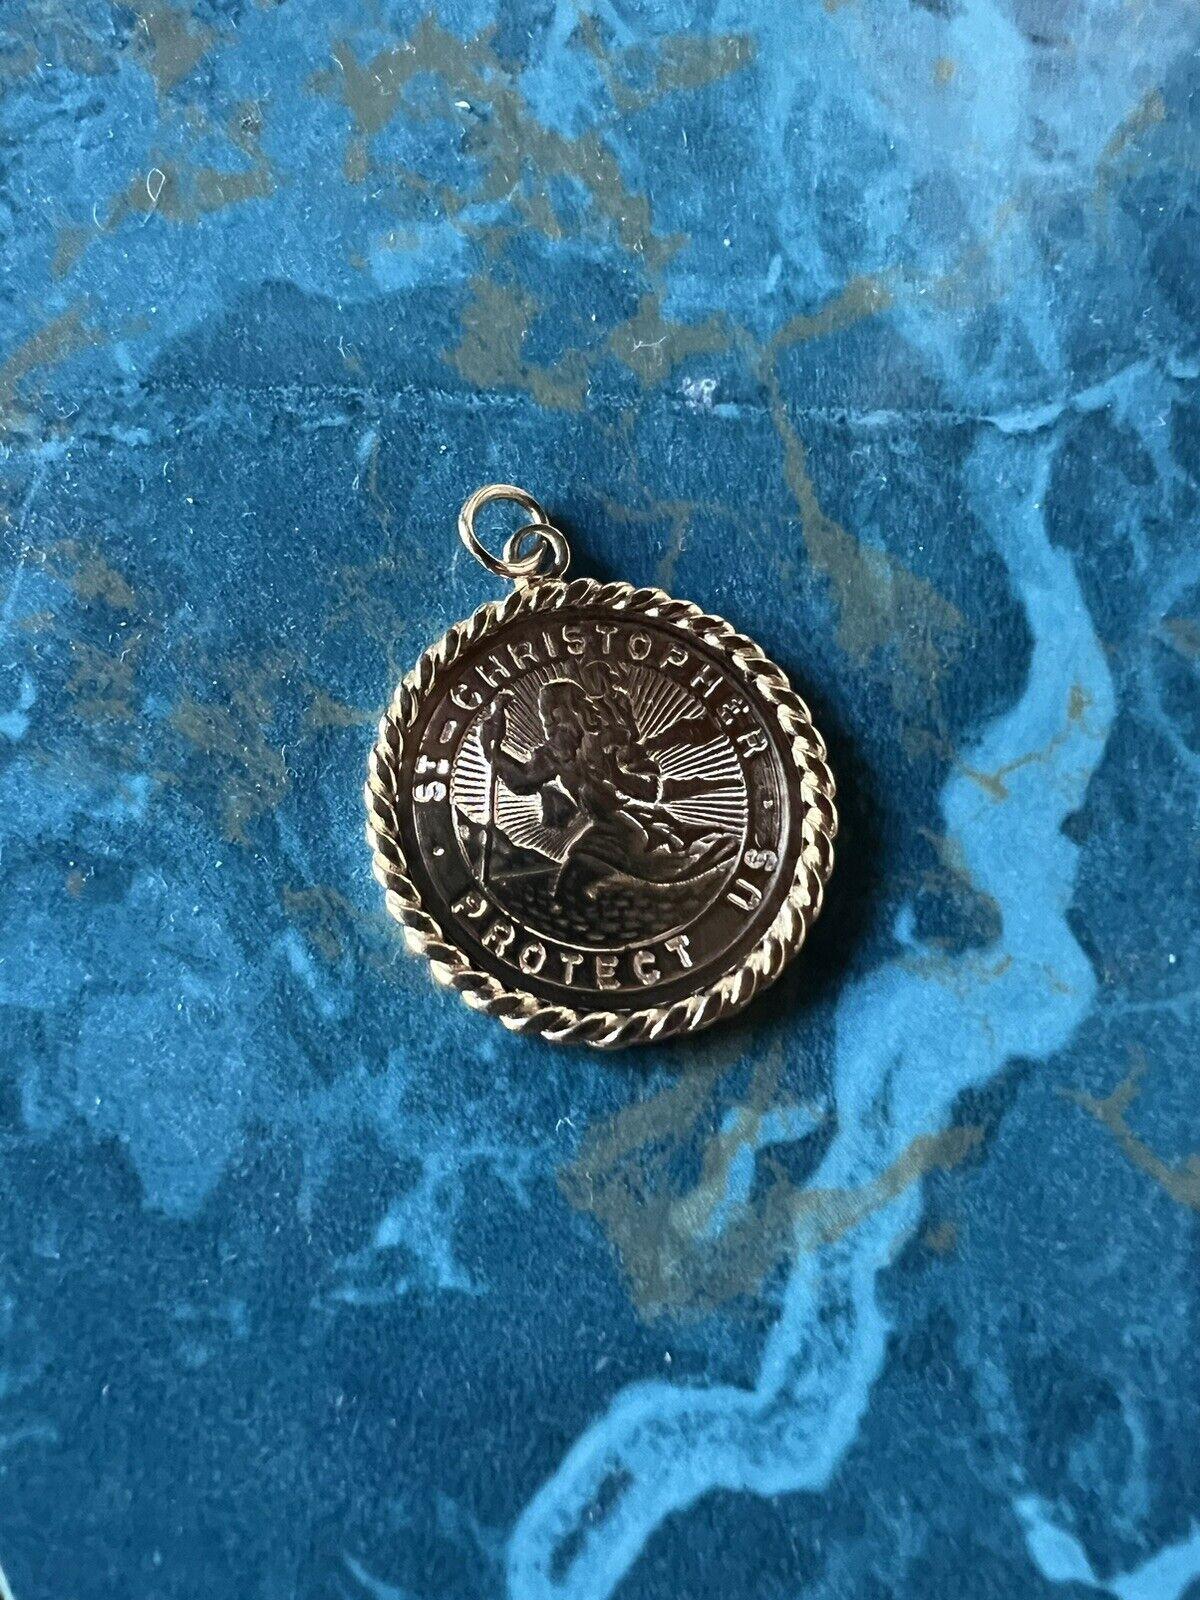 Tiffany & Co. Retro 14k Yellow Gold Saint Christopher Charm Pendant Circa 1950s

Here is your chance to purchase a beautiful and highly collectible designer charm pendant.  

The weight is 3.5 grams and the length with bail is 1 1/8 inches.  The